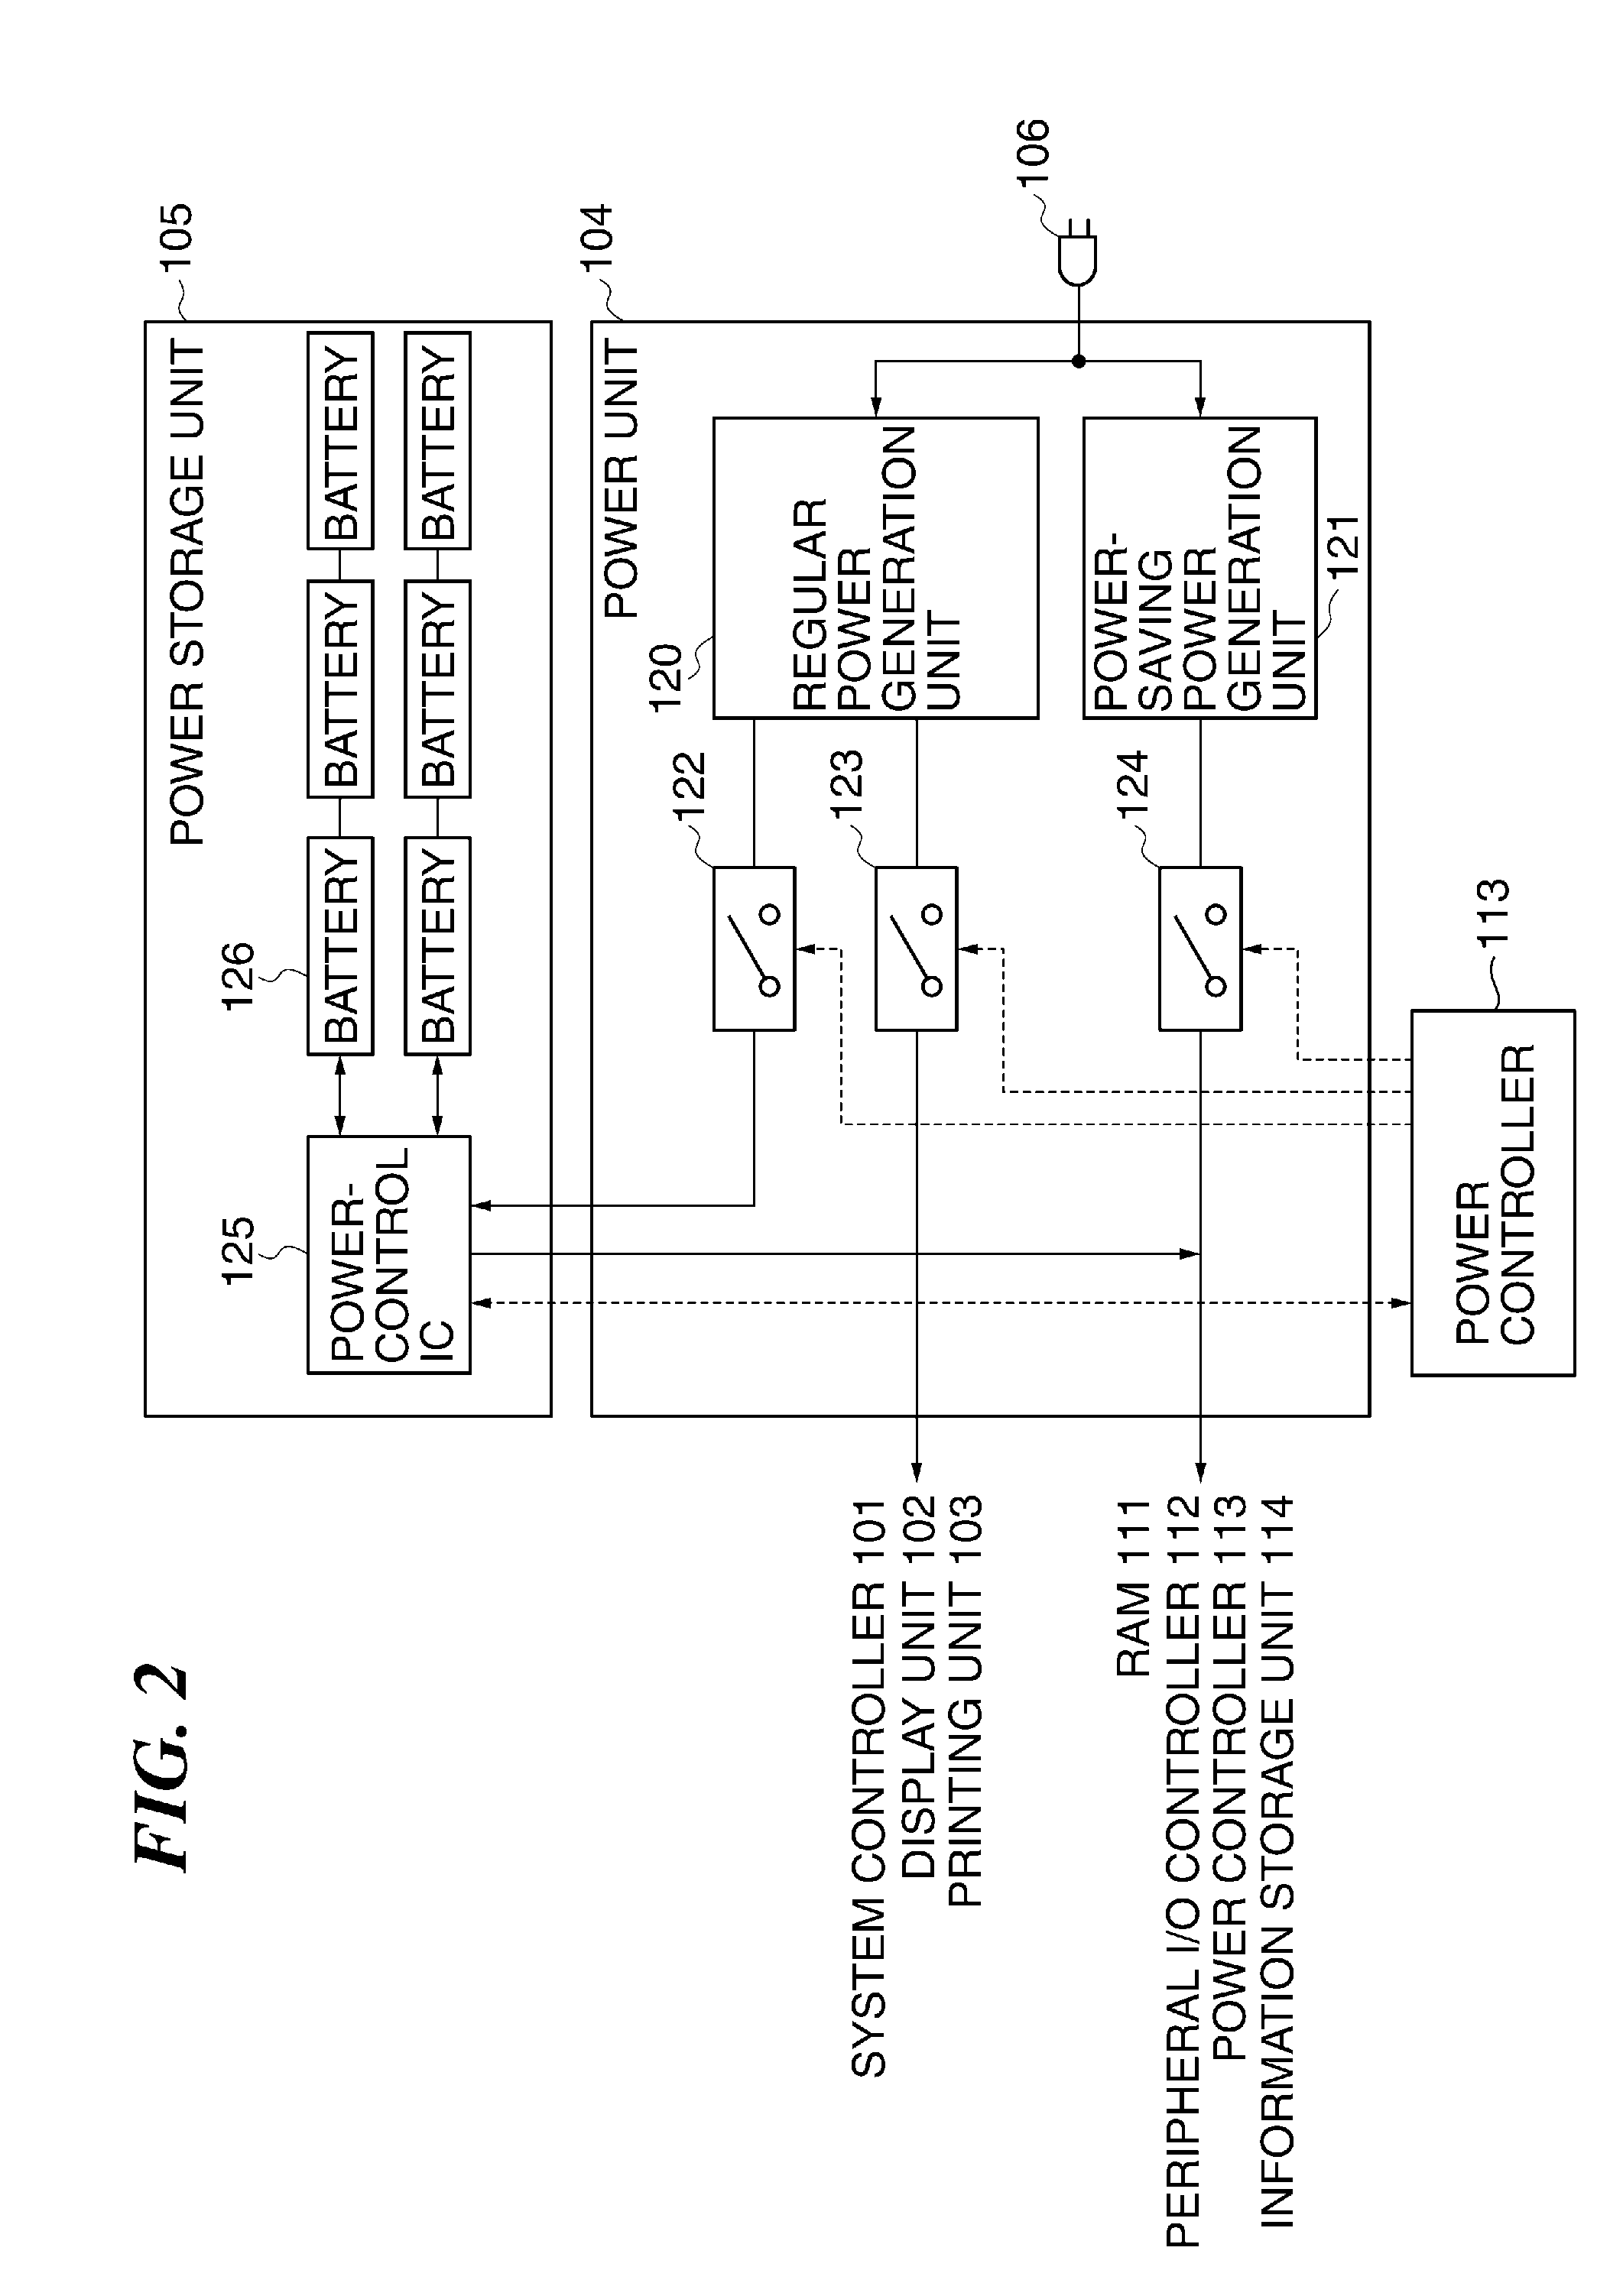 Method and system for ensuring a residual battery capacity reaching a predetermined value before transitioning apparatus to power-saving mode